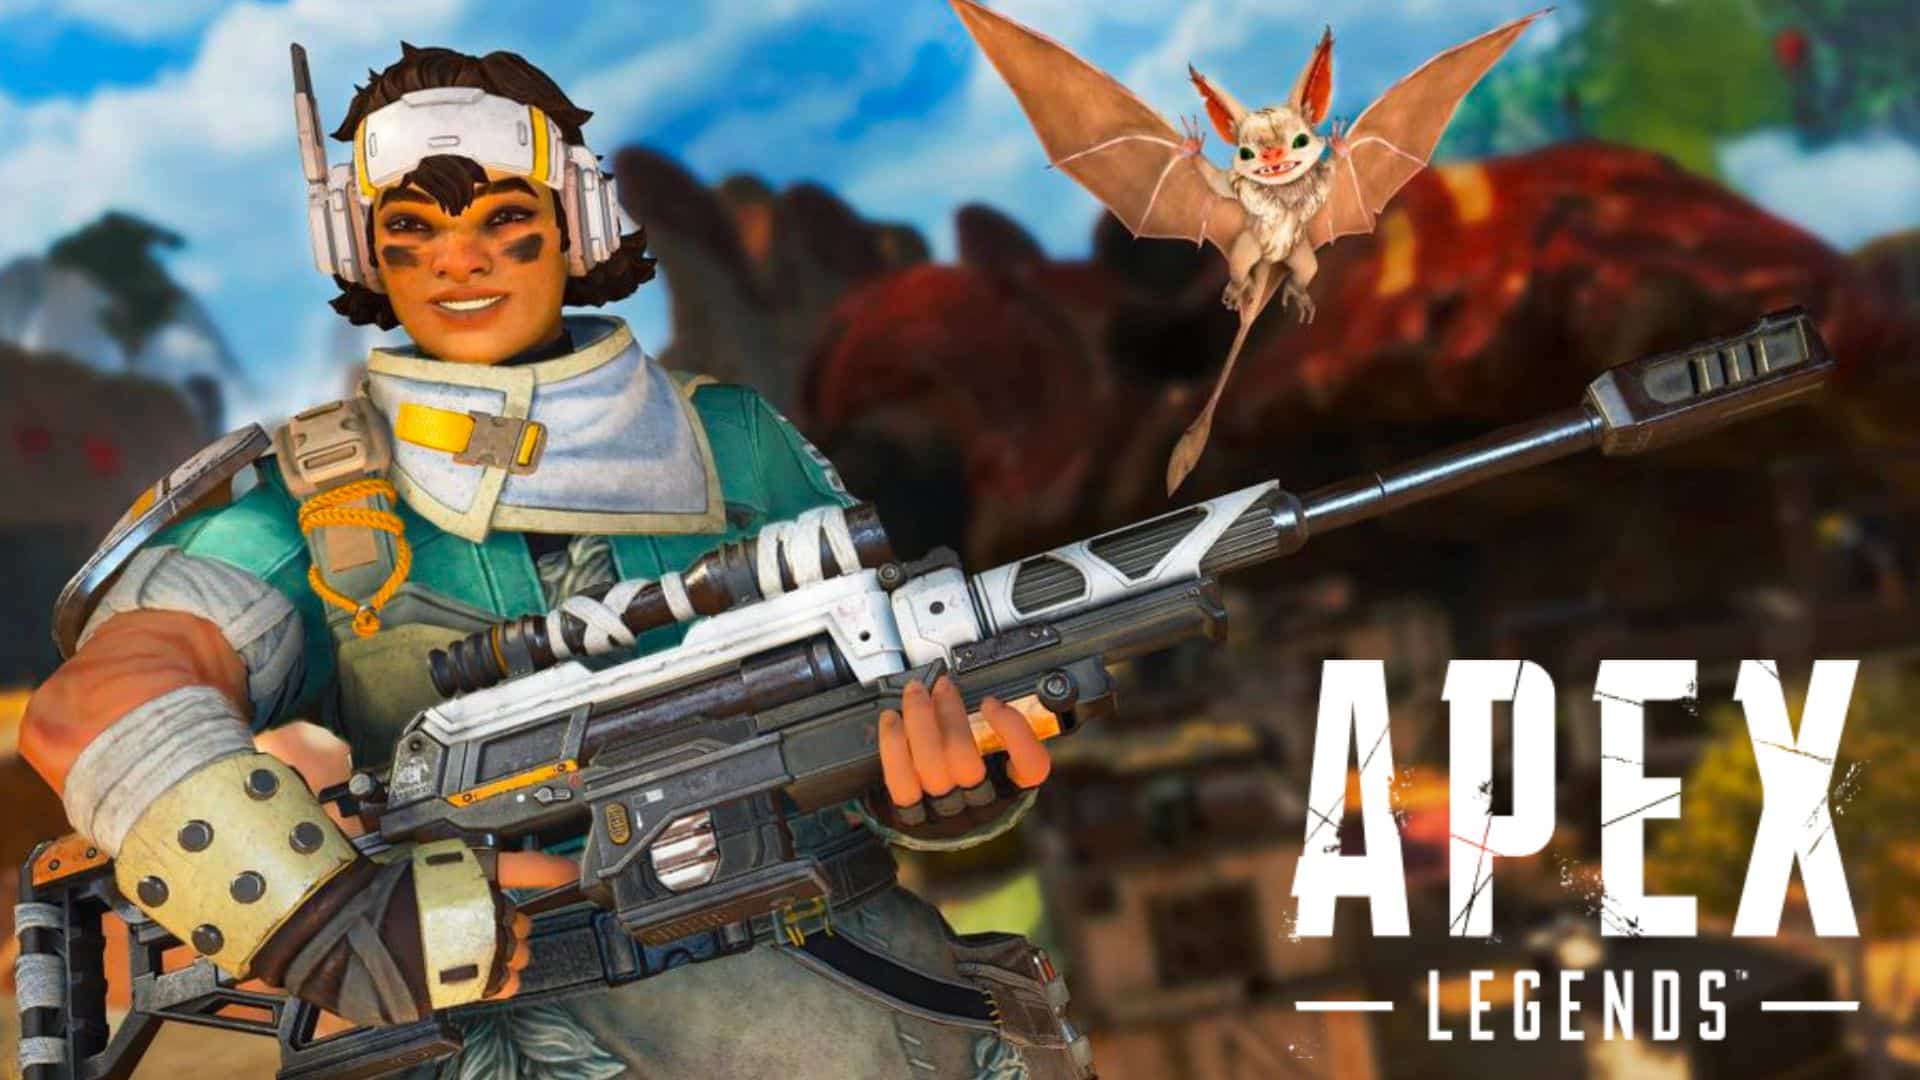 How to use Vantage's Echo tactical with other Legends abilities in Apex Legends